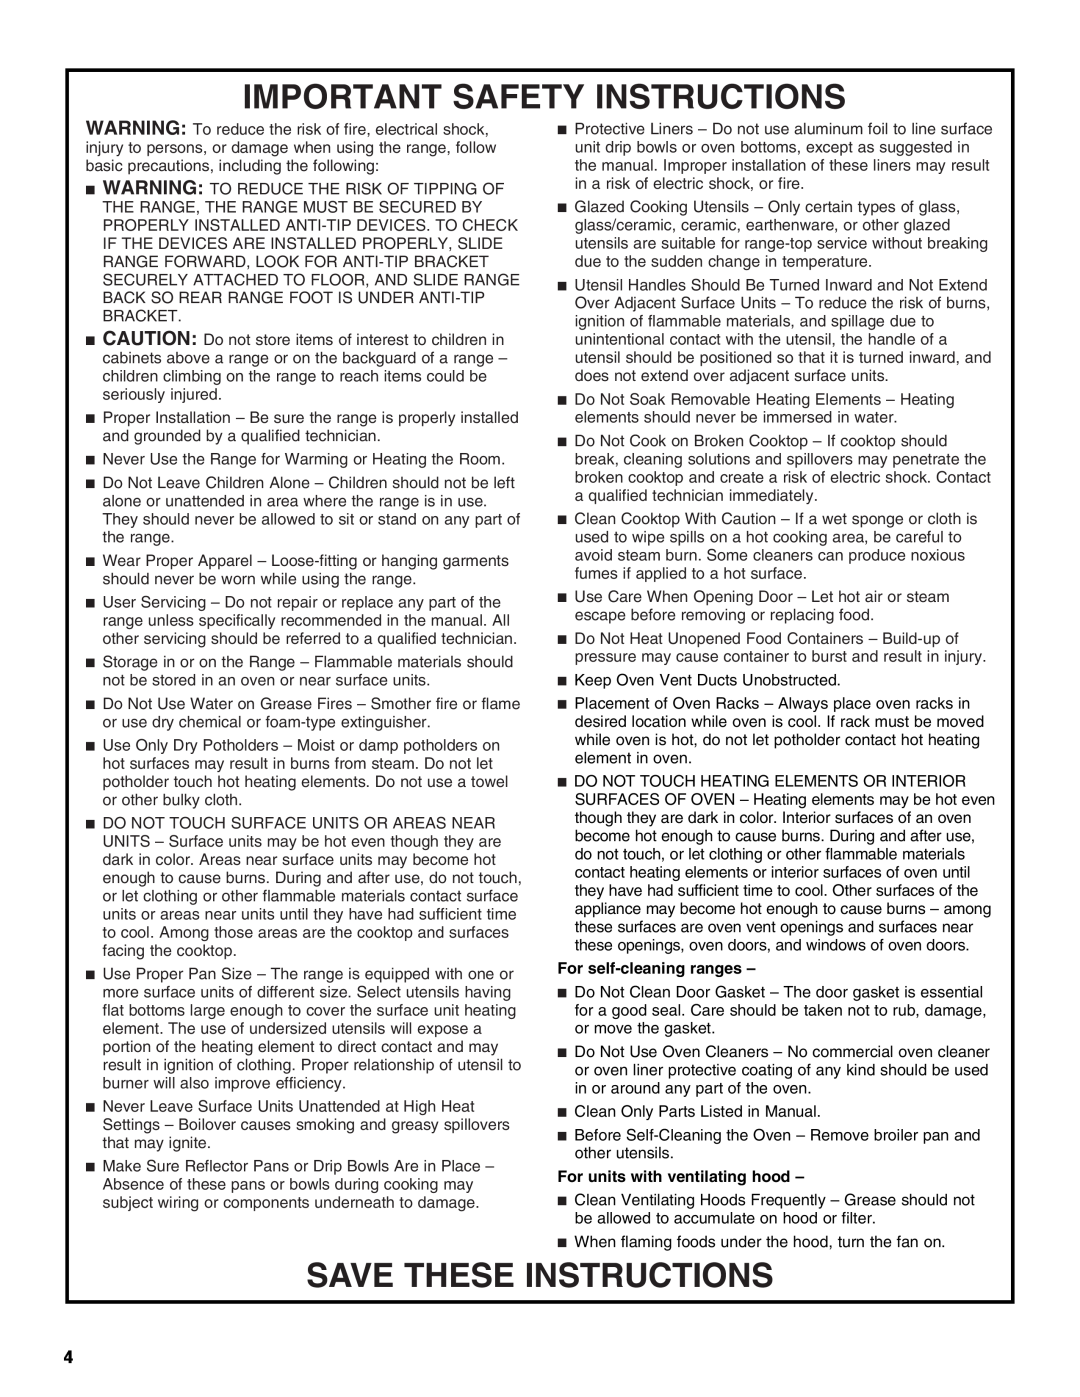 Whirlpool RF3020XKQ4 manual Important Safety Instructions, Save These Instructions, For self-cleaning ranges 